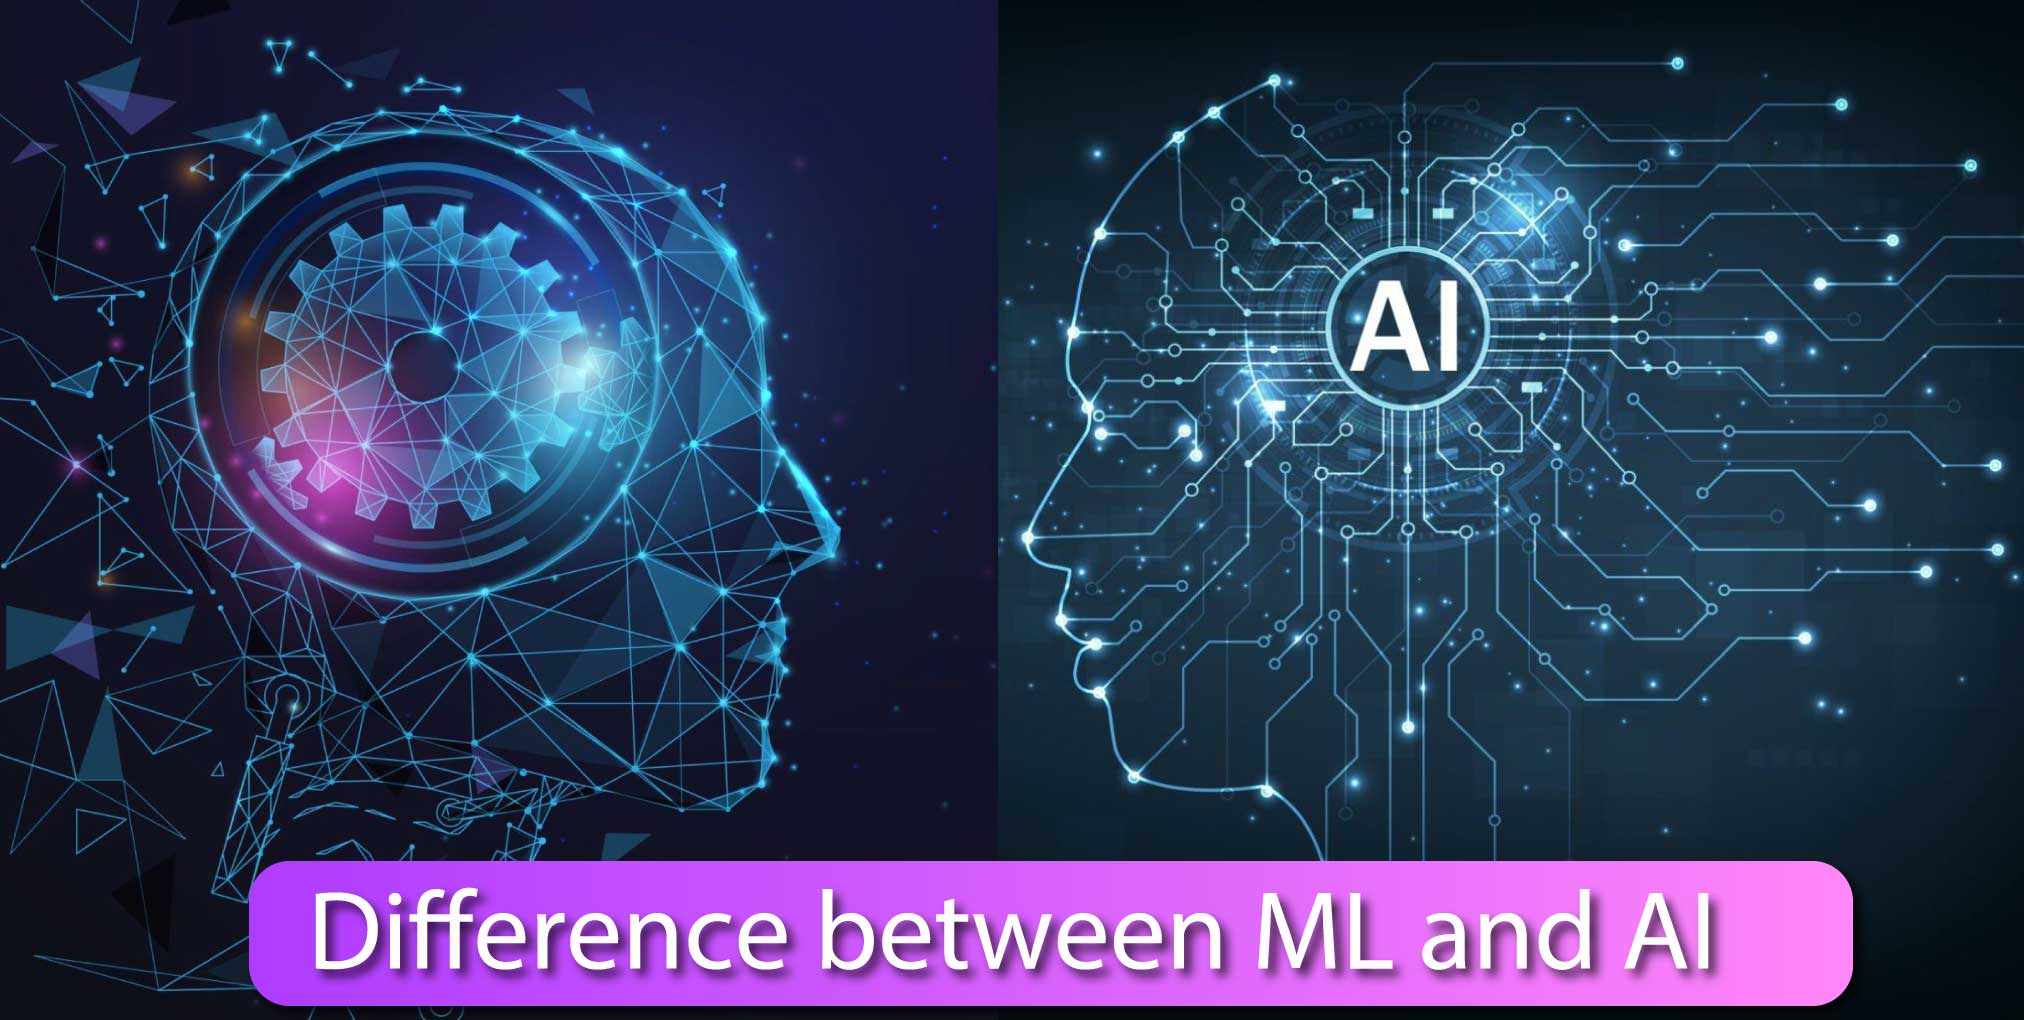 What is the difference between ML and AI?